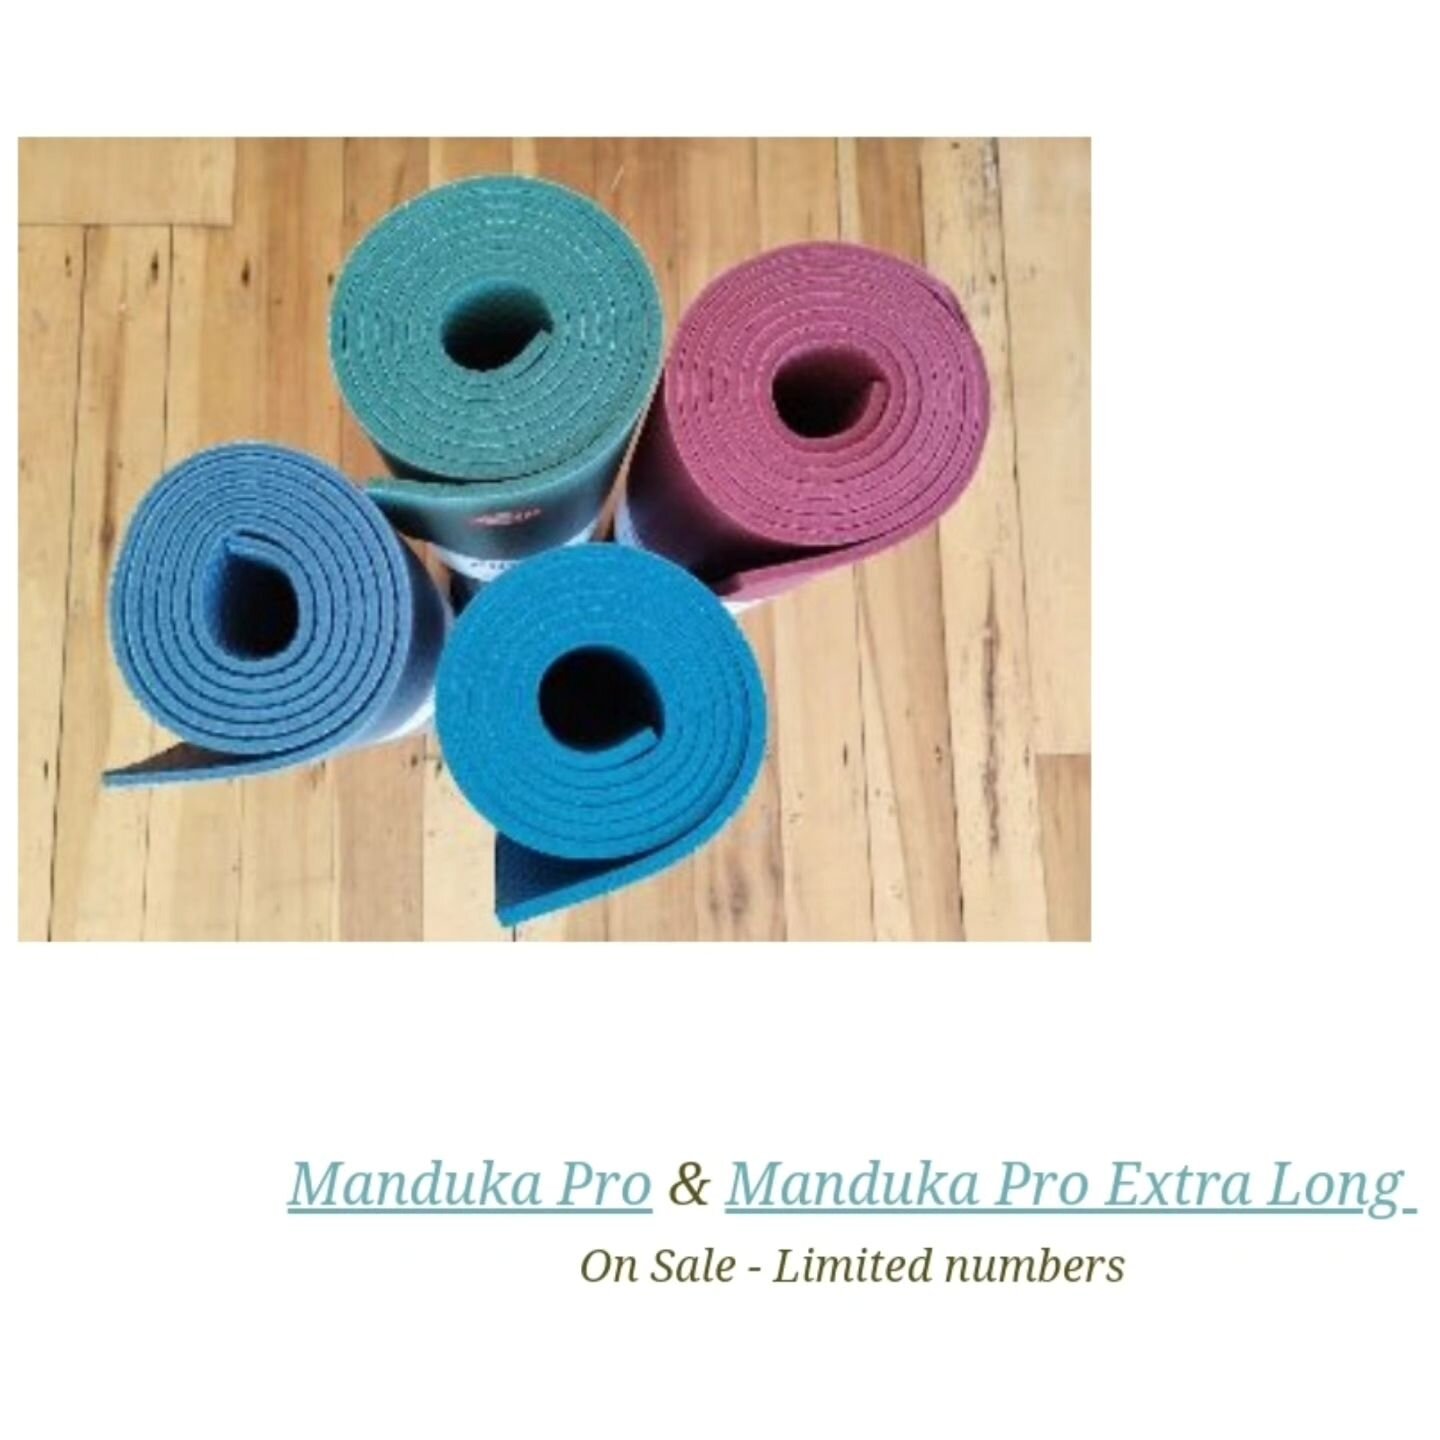 Manduka Mats on sale - 20% discount 
Limited numbers

Different ways of practicing with a Halasana Box
Halasana Box - made from recycled NZ Rimu